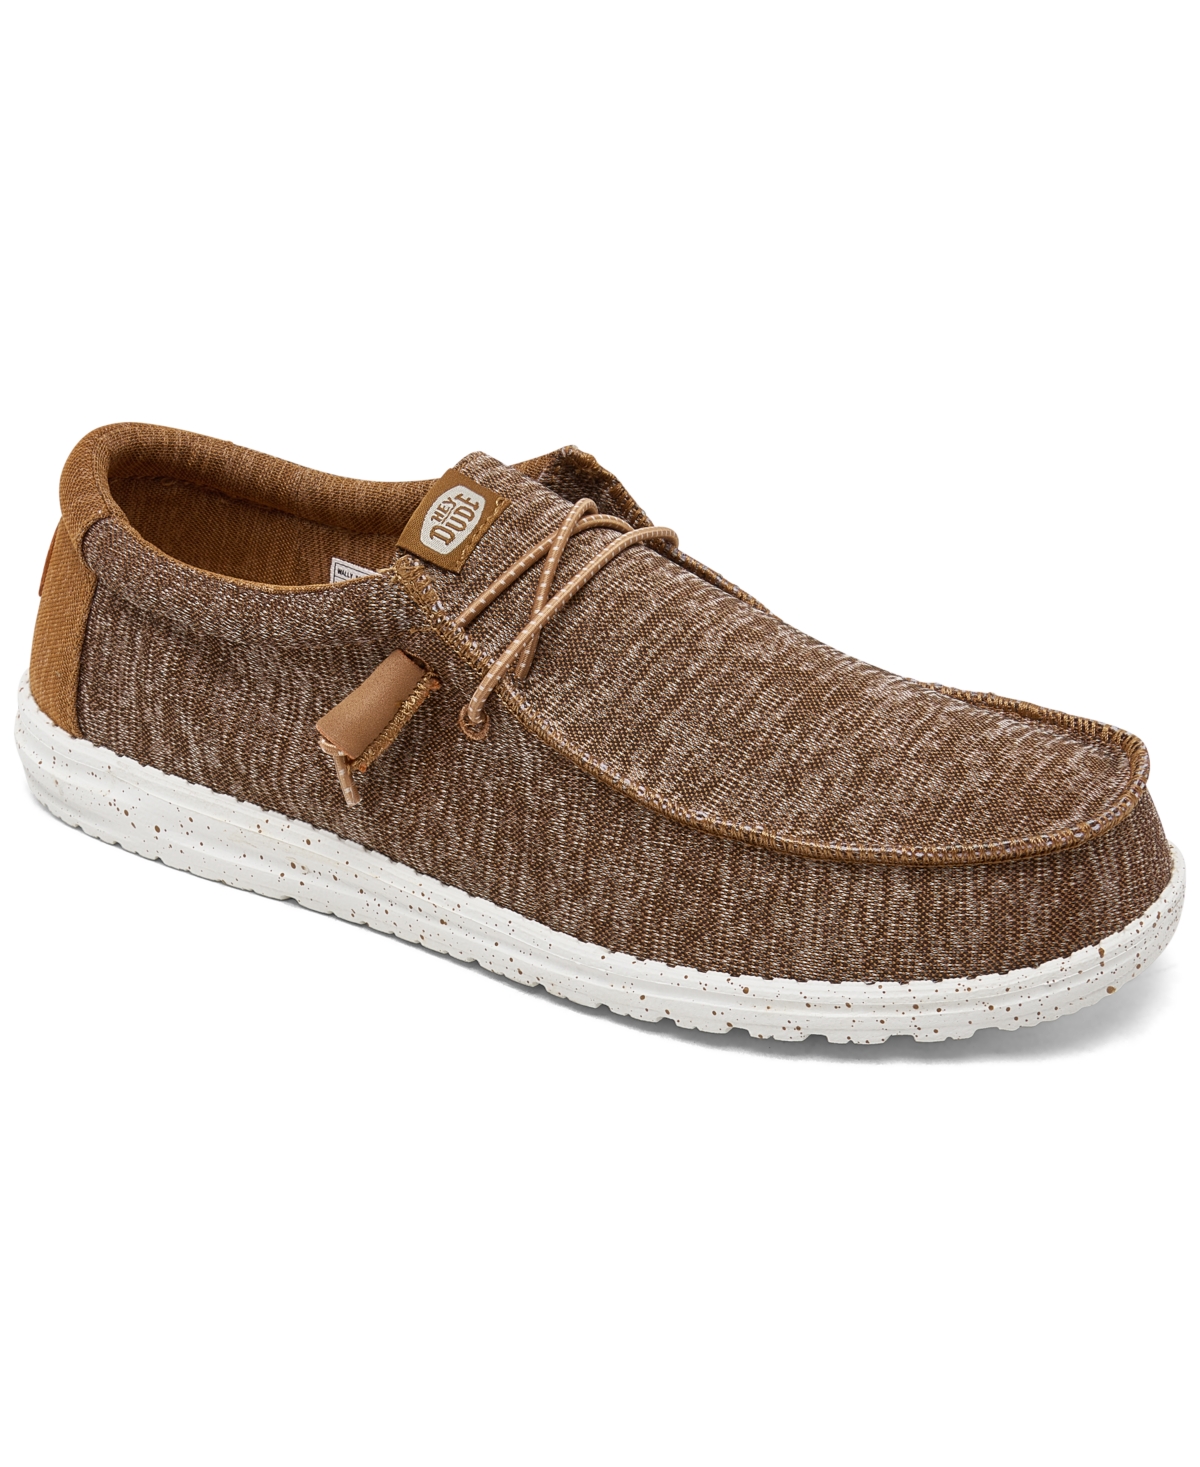 Hey Dude Men's Wally Sport Knit Casual Moccasin Sneakers From Finish Line In Walnut